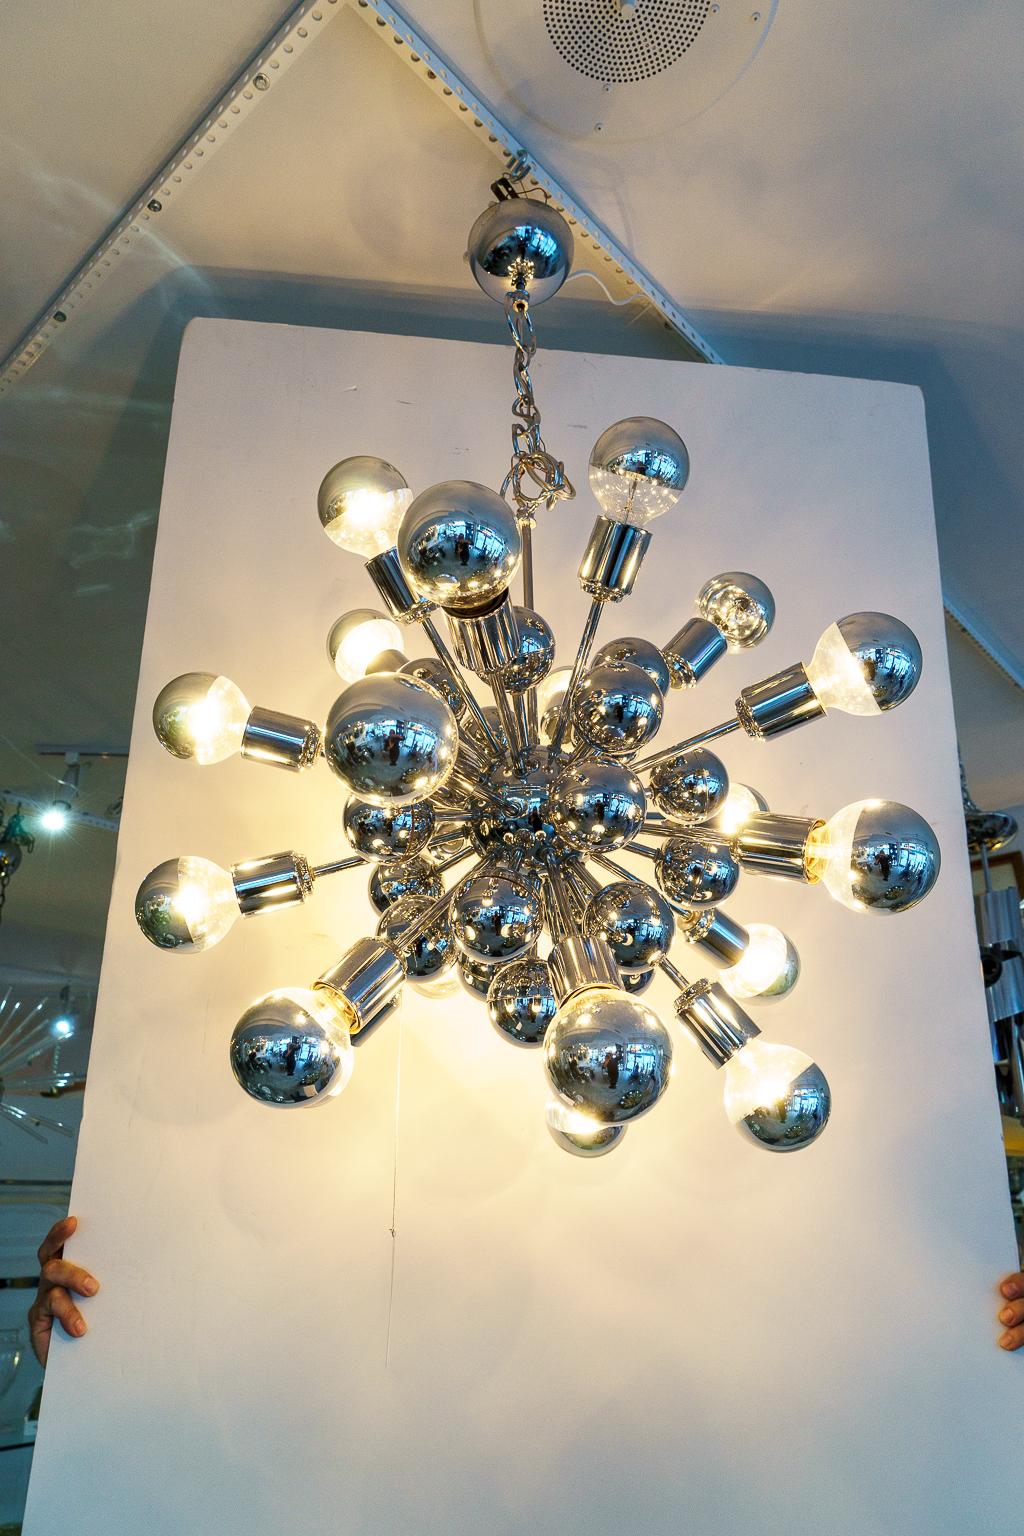 This stylish 20 light Sputnik style chandelier dates to the 1970s and was created by the italian architect and designer Giatano Scolari. 

Note: Dimensions not including the chain are 22